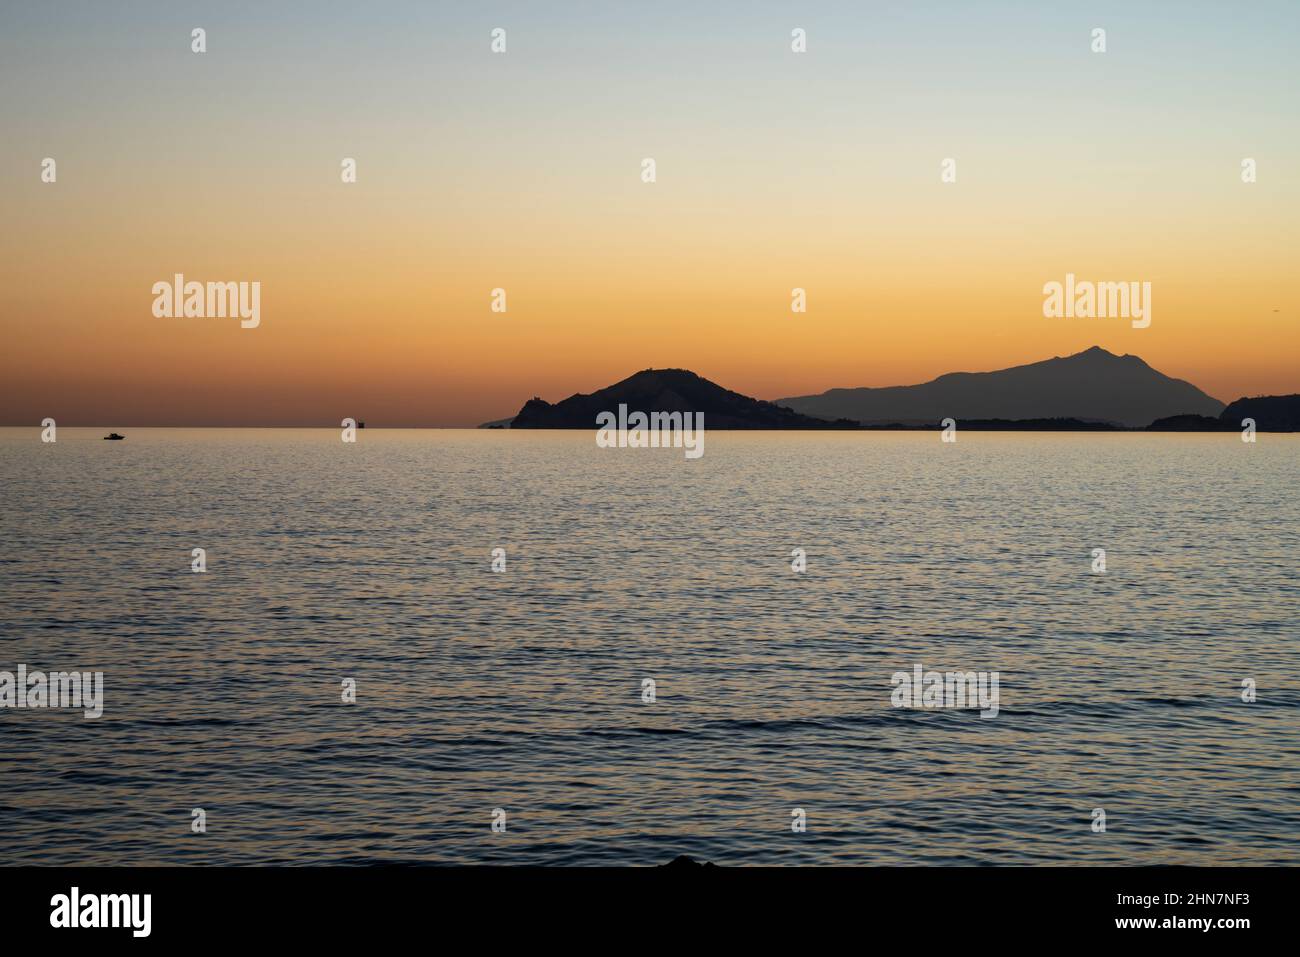 Sunset at sea. Sea landscape. Variety of colors and hues of the sun. Bagnoli, Naples, Italy. Stock Photo